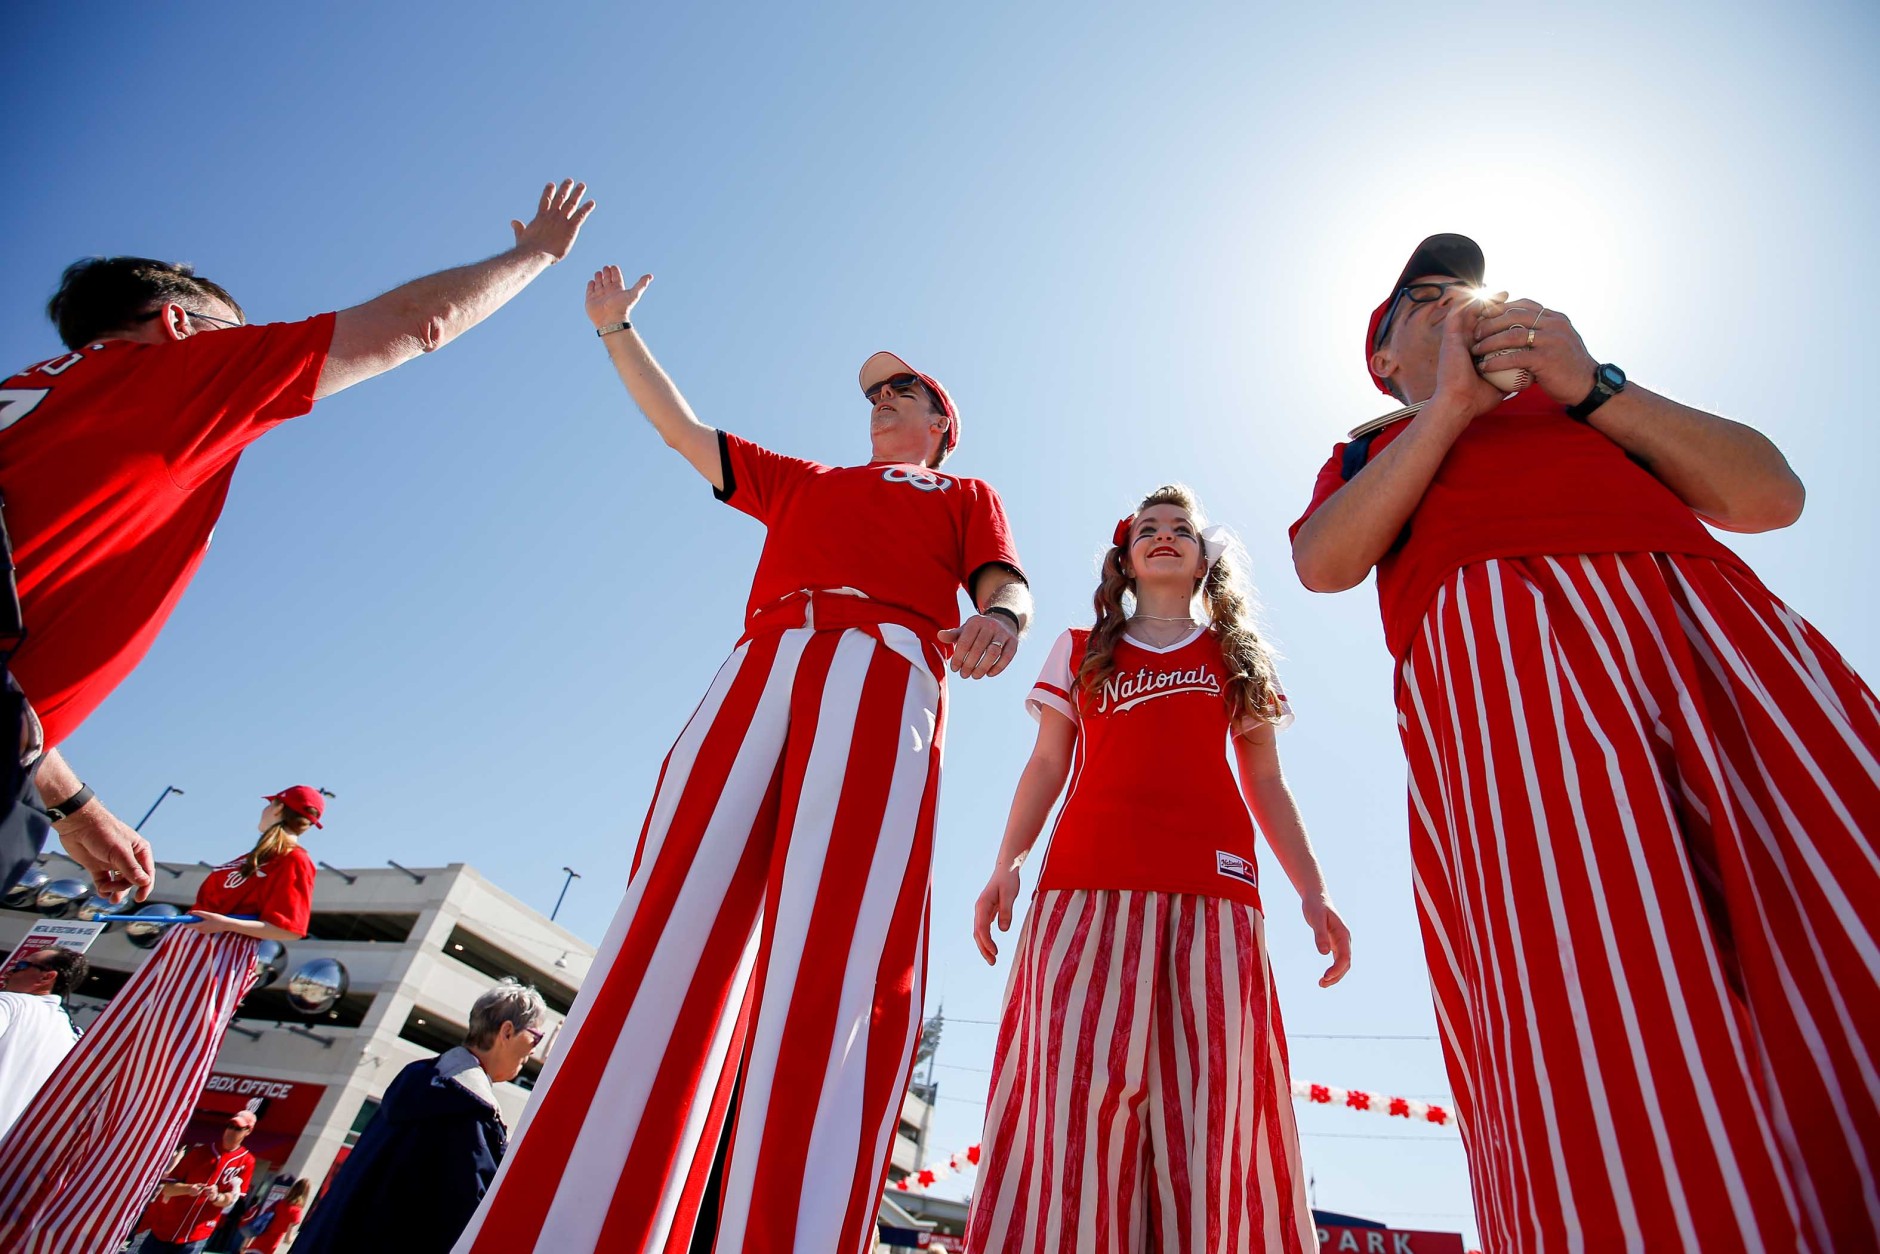 Entertainers on stilts welcome fans to the stadium before a baseball game between the Washington Nationals and the New York Mets on opening day at Nationals Park, Monday, April 6, 2015, in Washington. (AP Photo/Andrew Harnik)